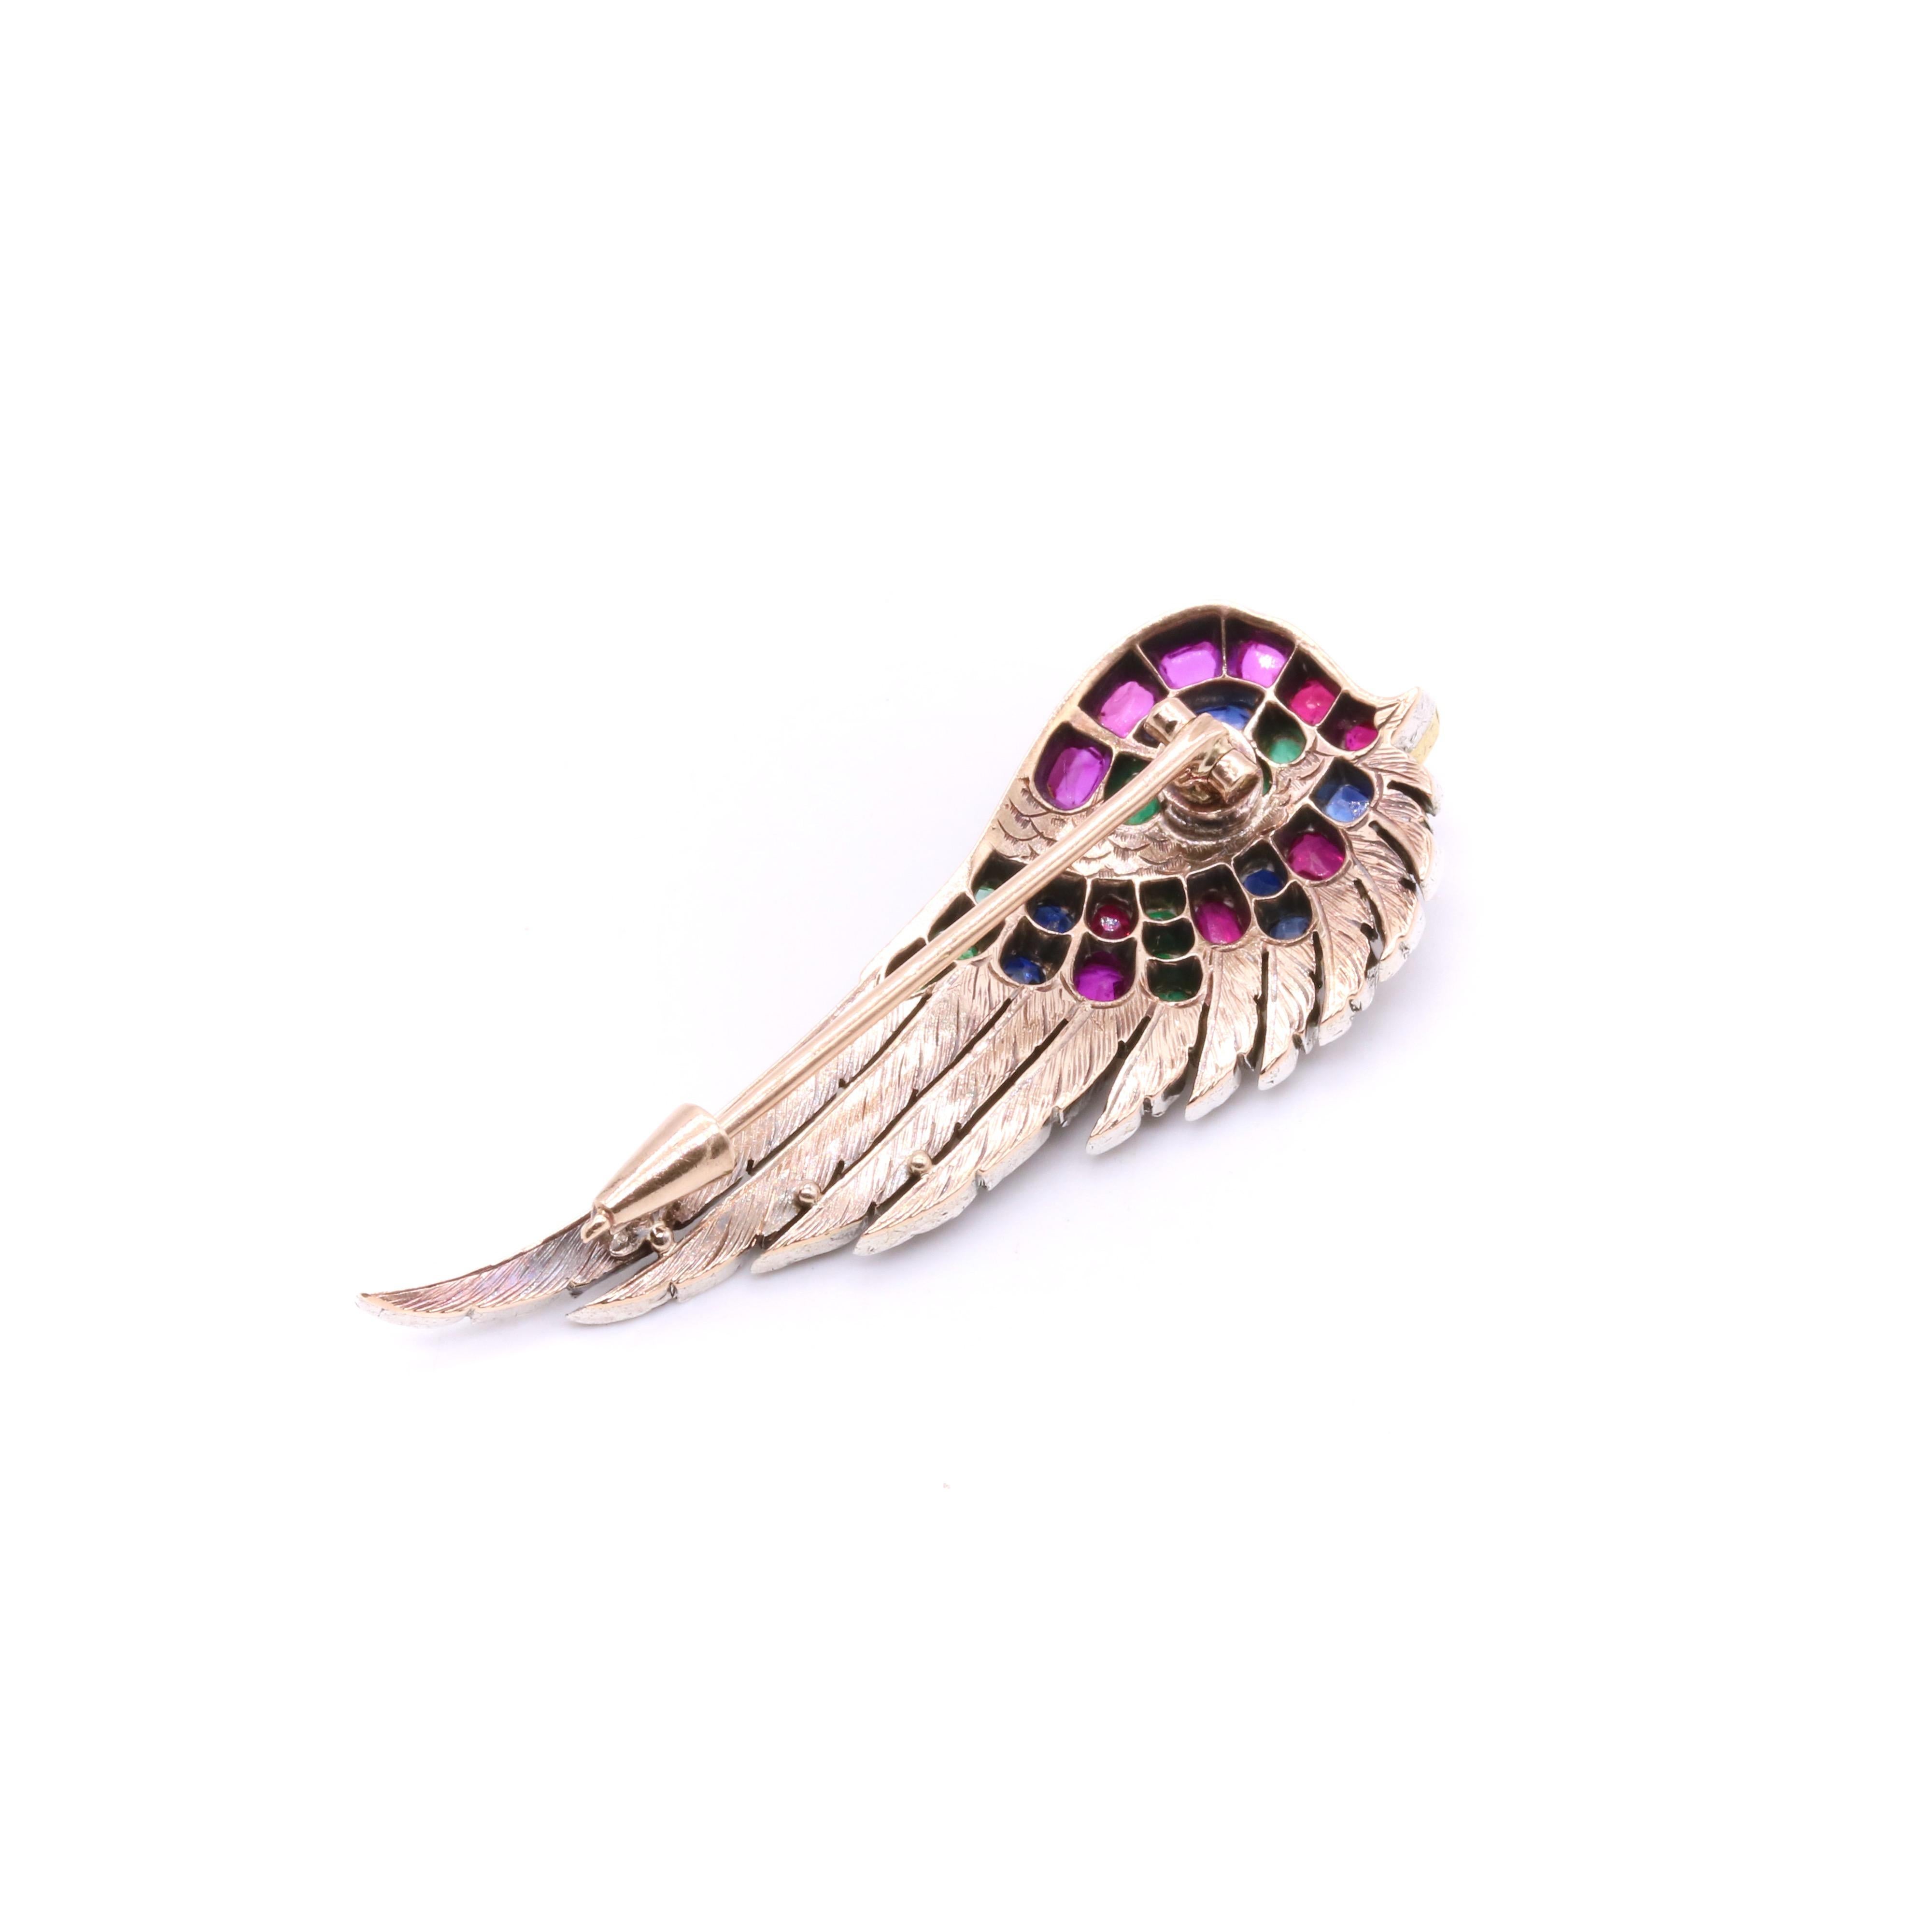 French Antique 18K Gold & Silver Ruby, Sapphire, Emerald & Diamond Wing Brooch For Sale 3